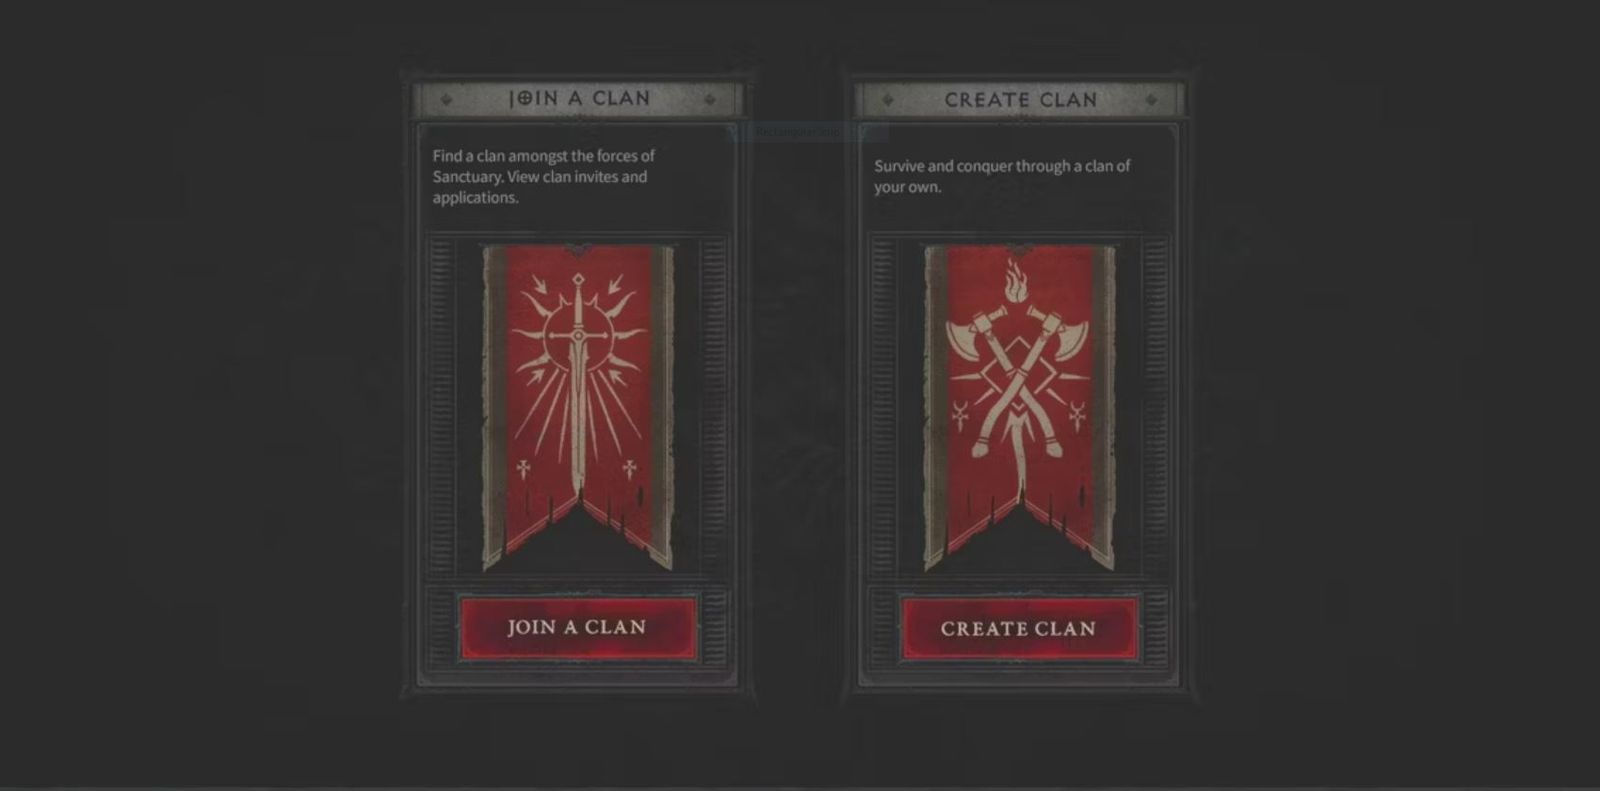 Creating or joining a clan in Diablo 4